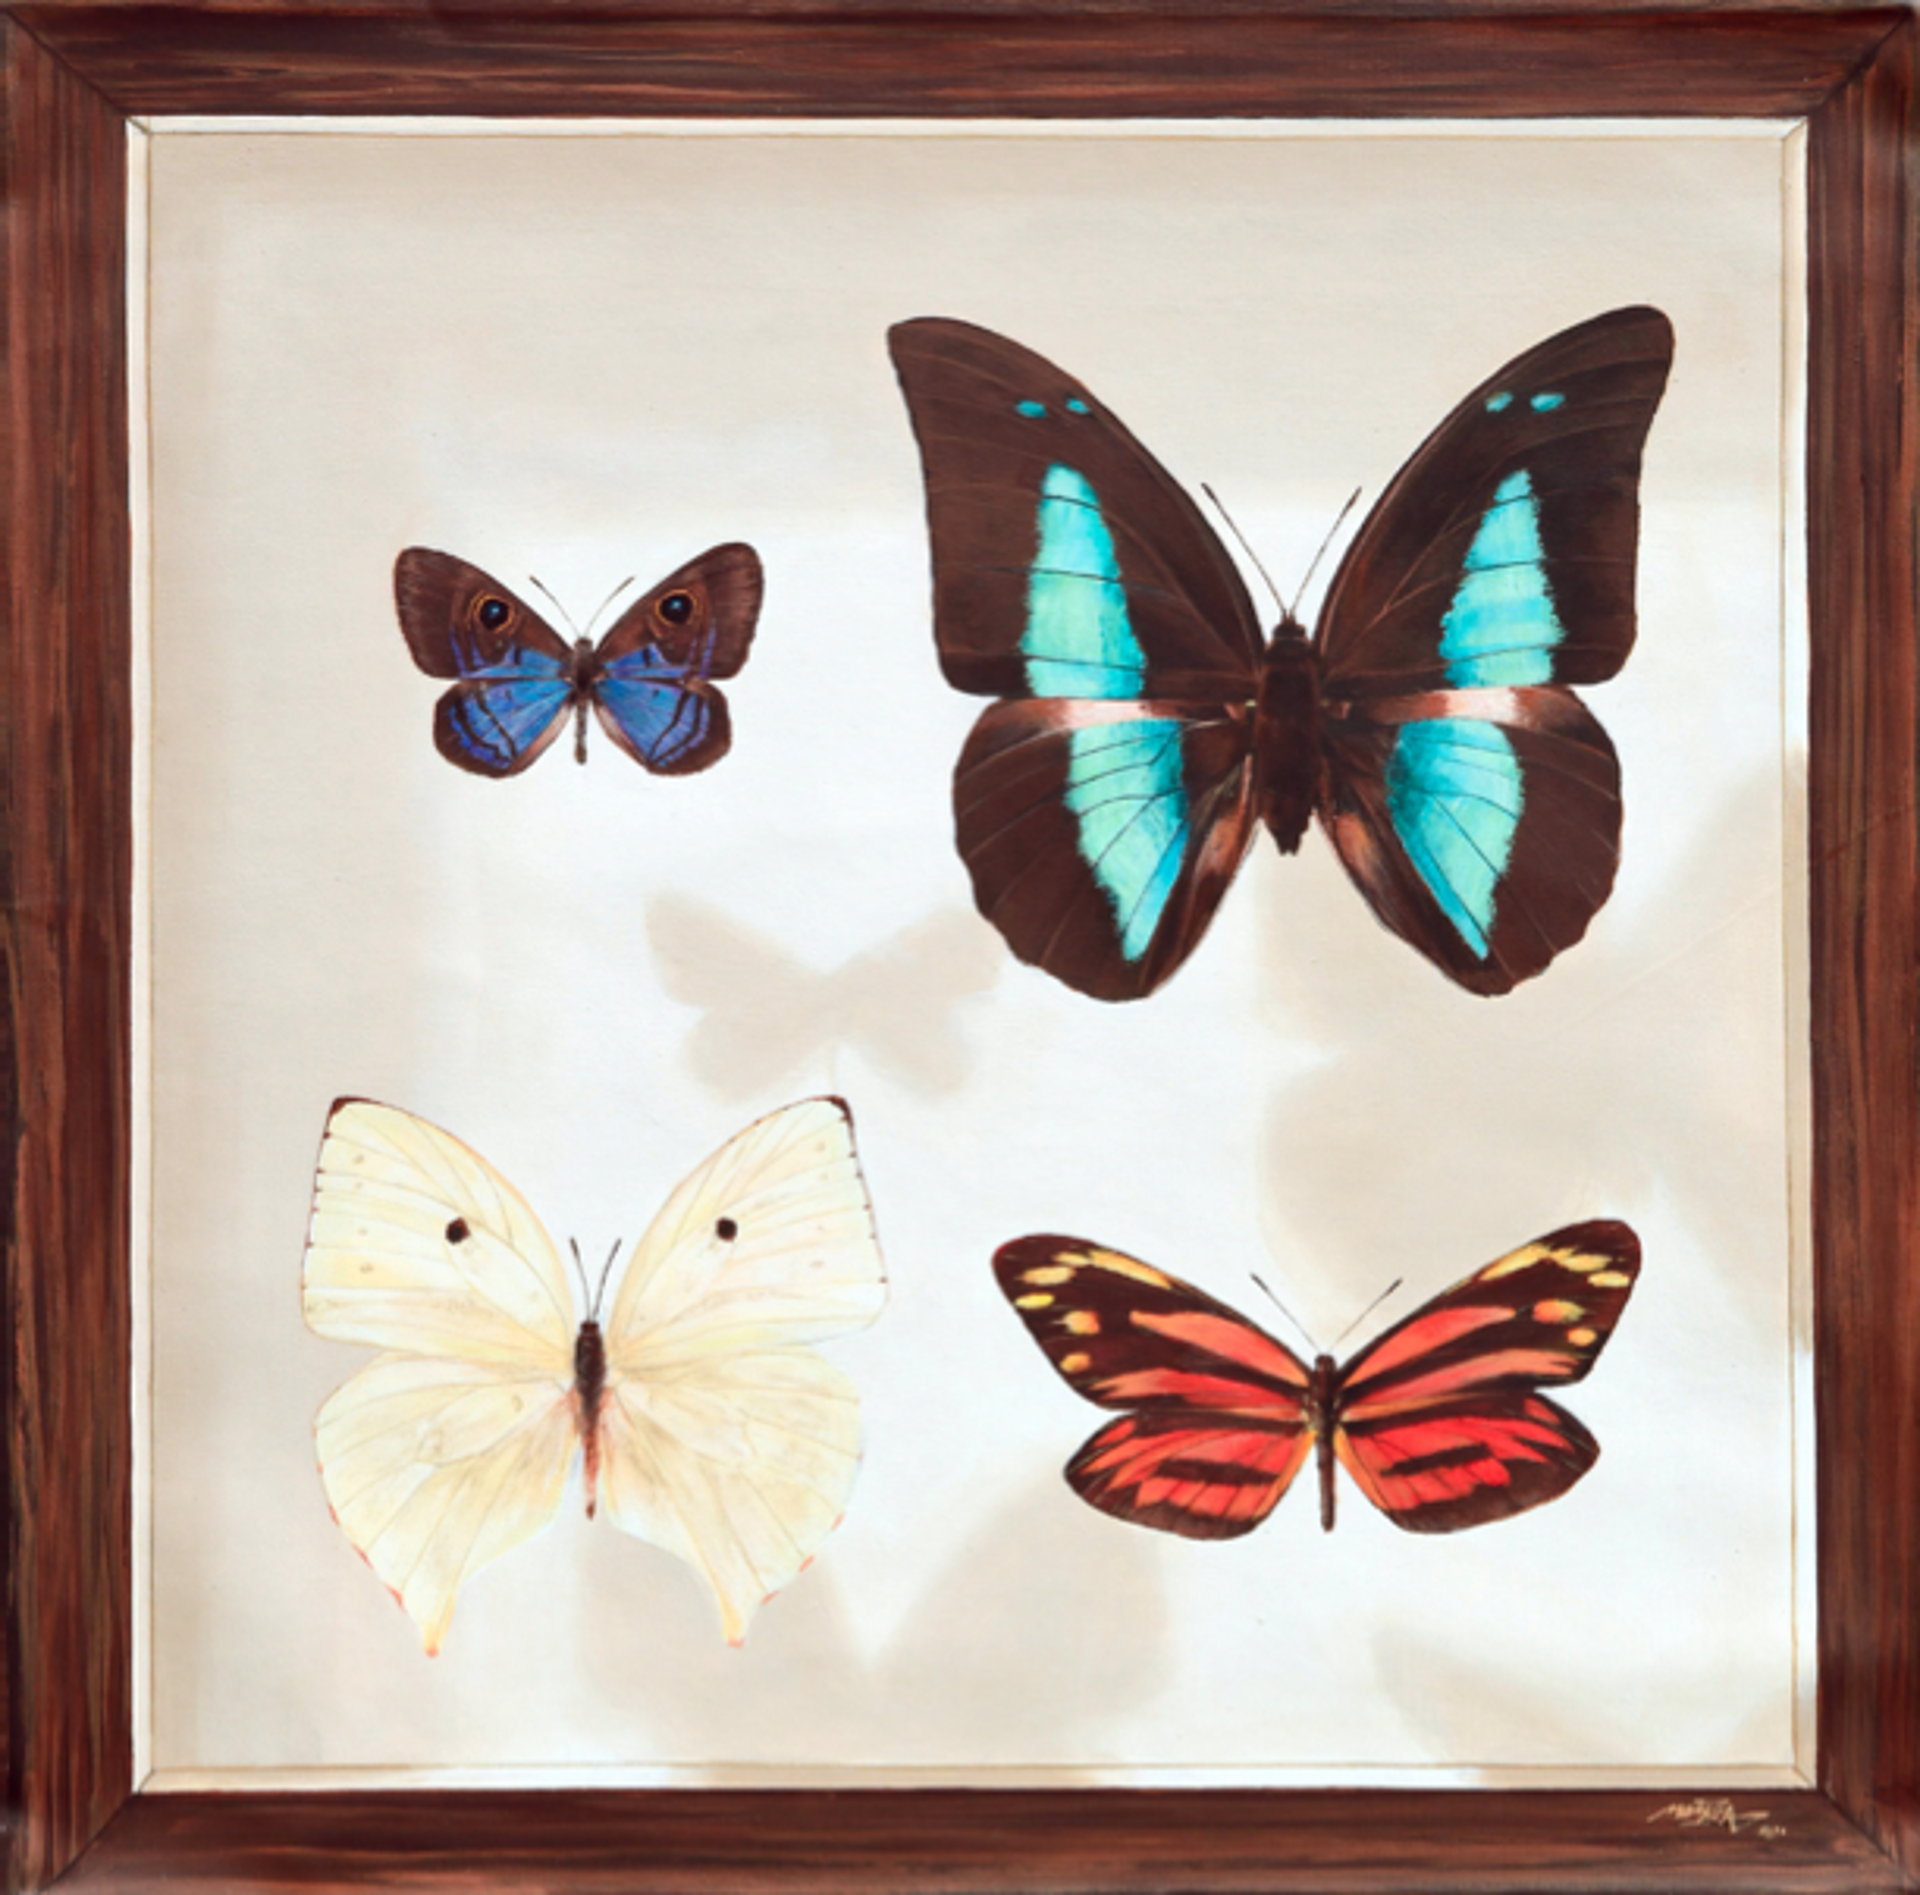 Butterflies of Mexico - Board 3 by Youri Cansell aka Mantra